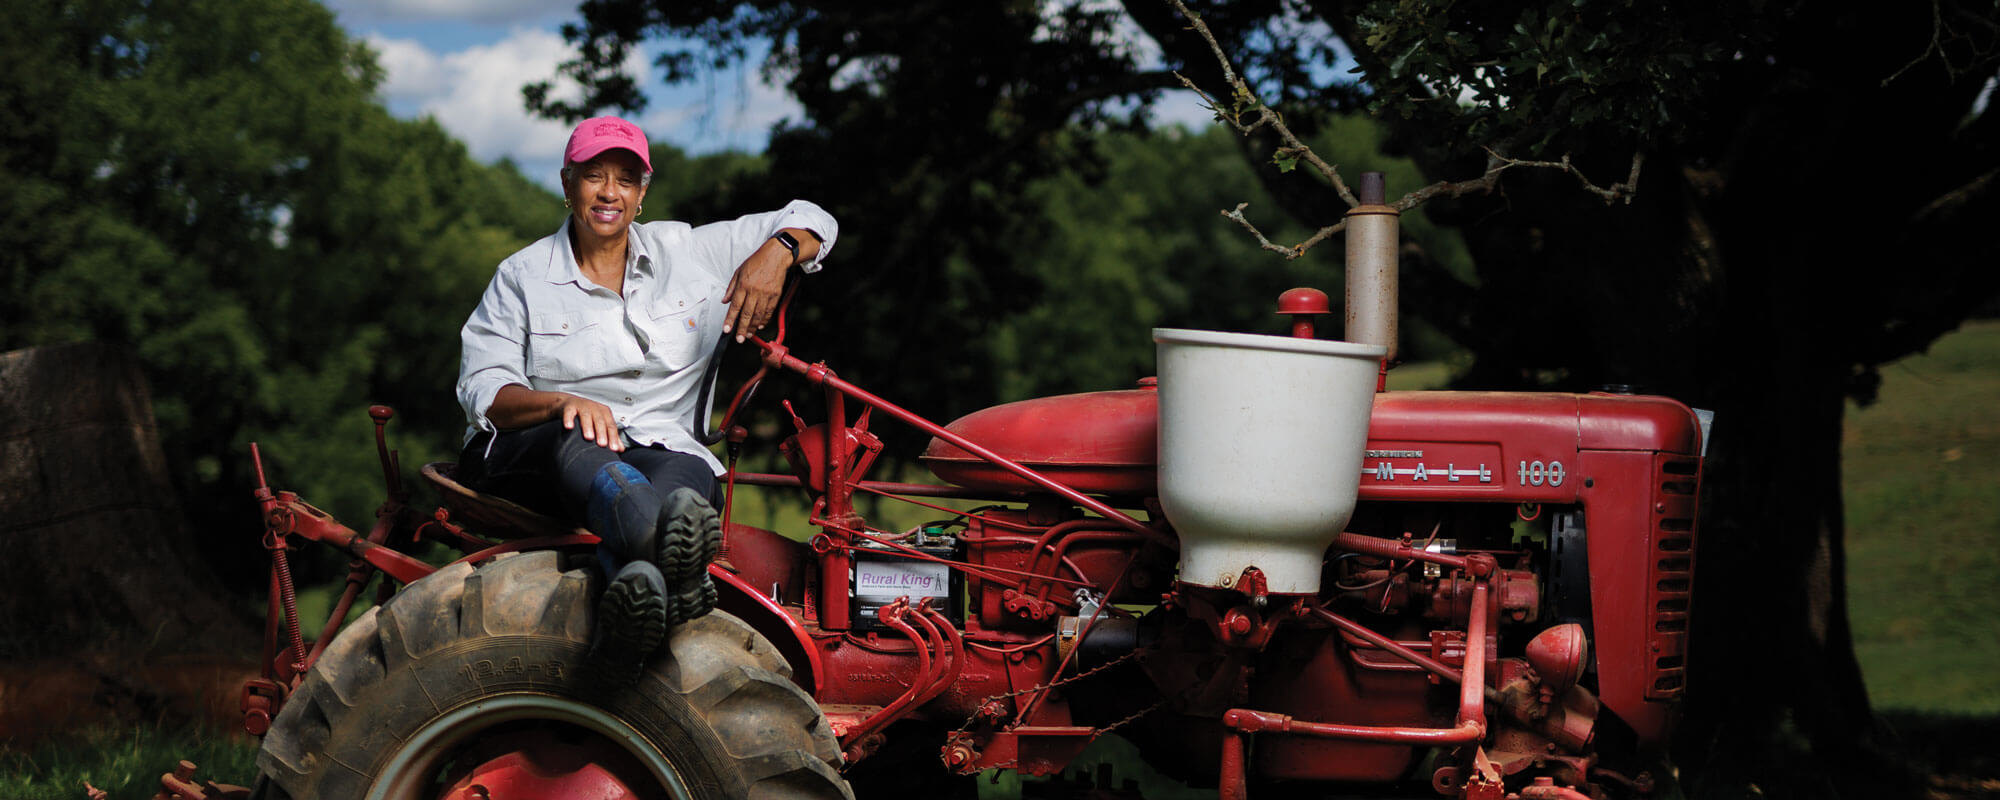 Sustainable farmer Beverly Bowen relaxes for a moment on her 1954 McCormick Farmall, the same model she grew up using as a girl on the farm she and her brother run today.